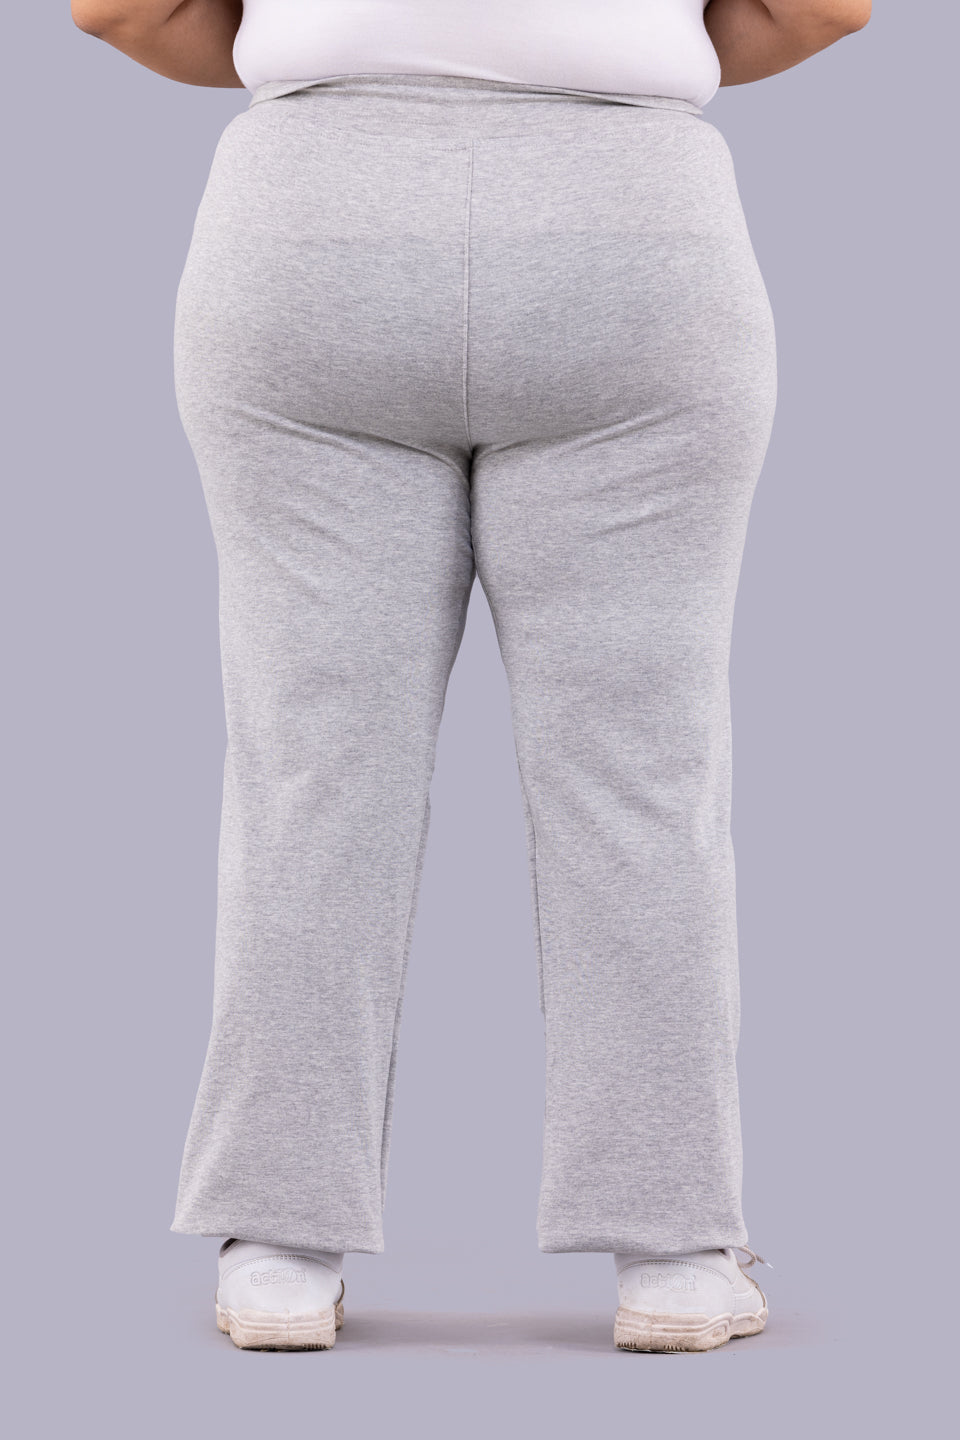 Buy Rose Gold Track Pants for Women by Femea Online | Ajio.com